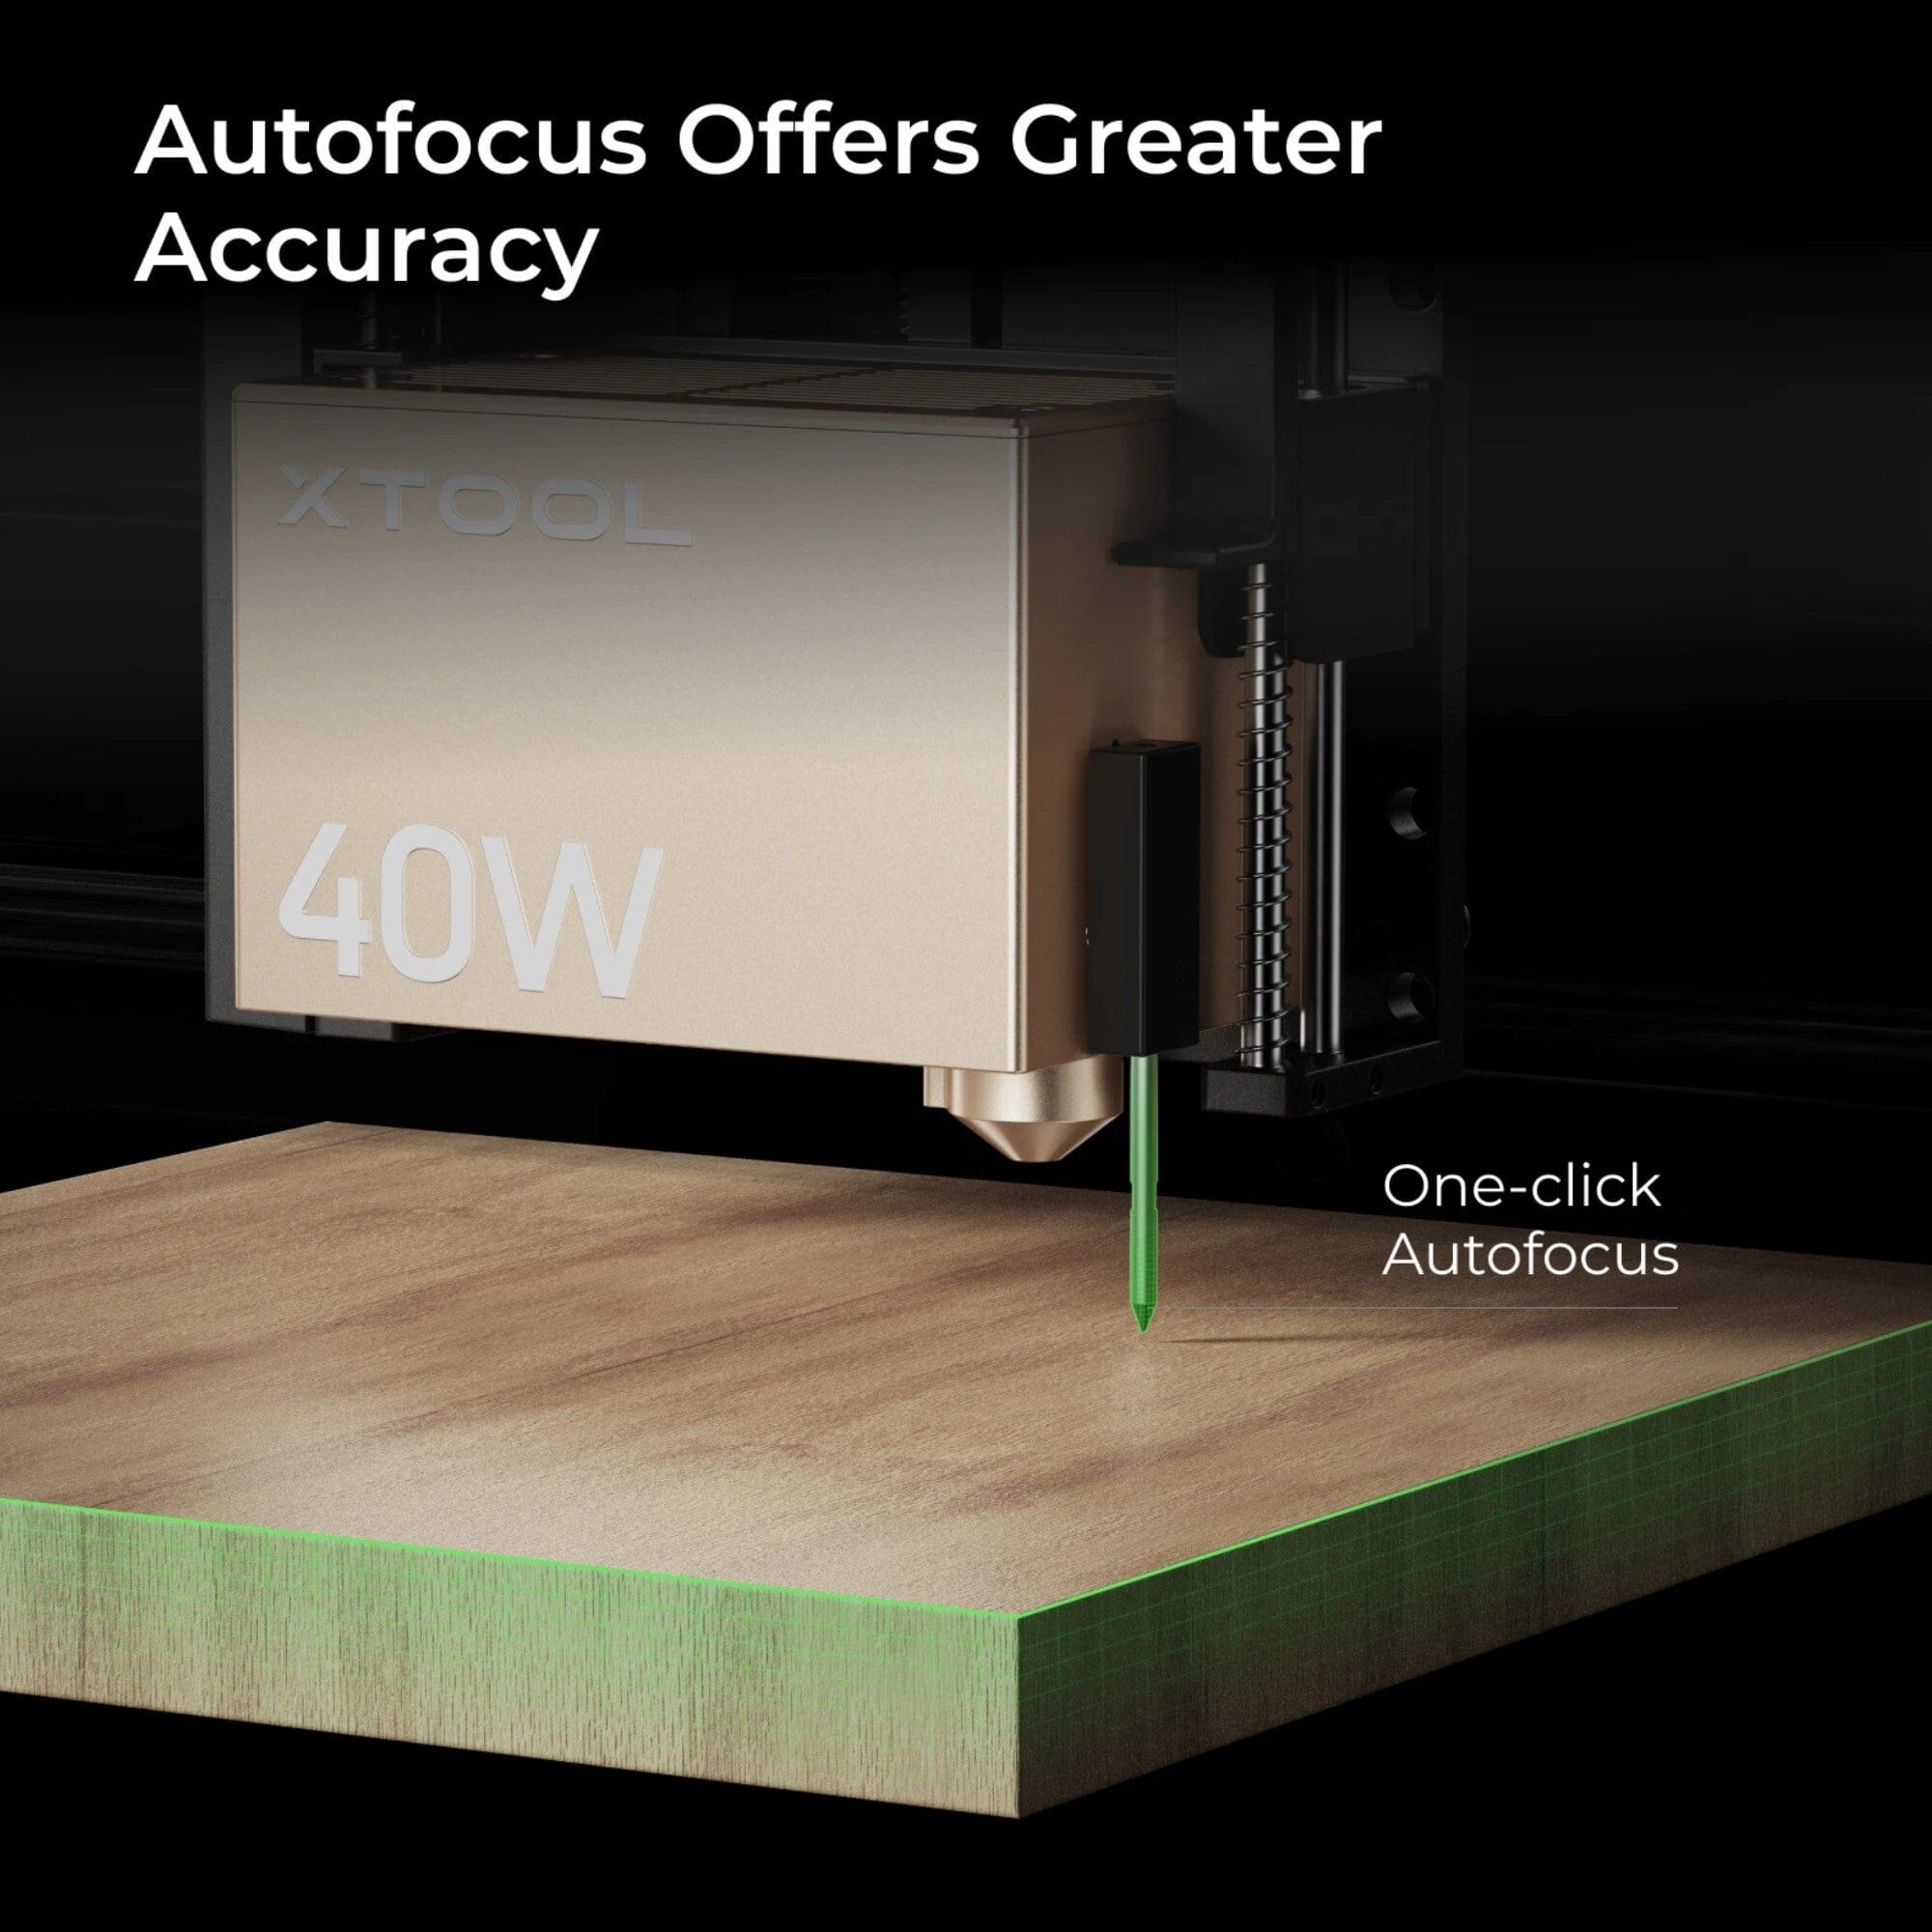 Meet xTool S1, the world's first 40W enclosed diode laser engraver